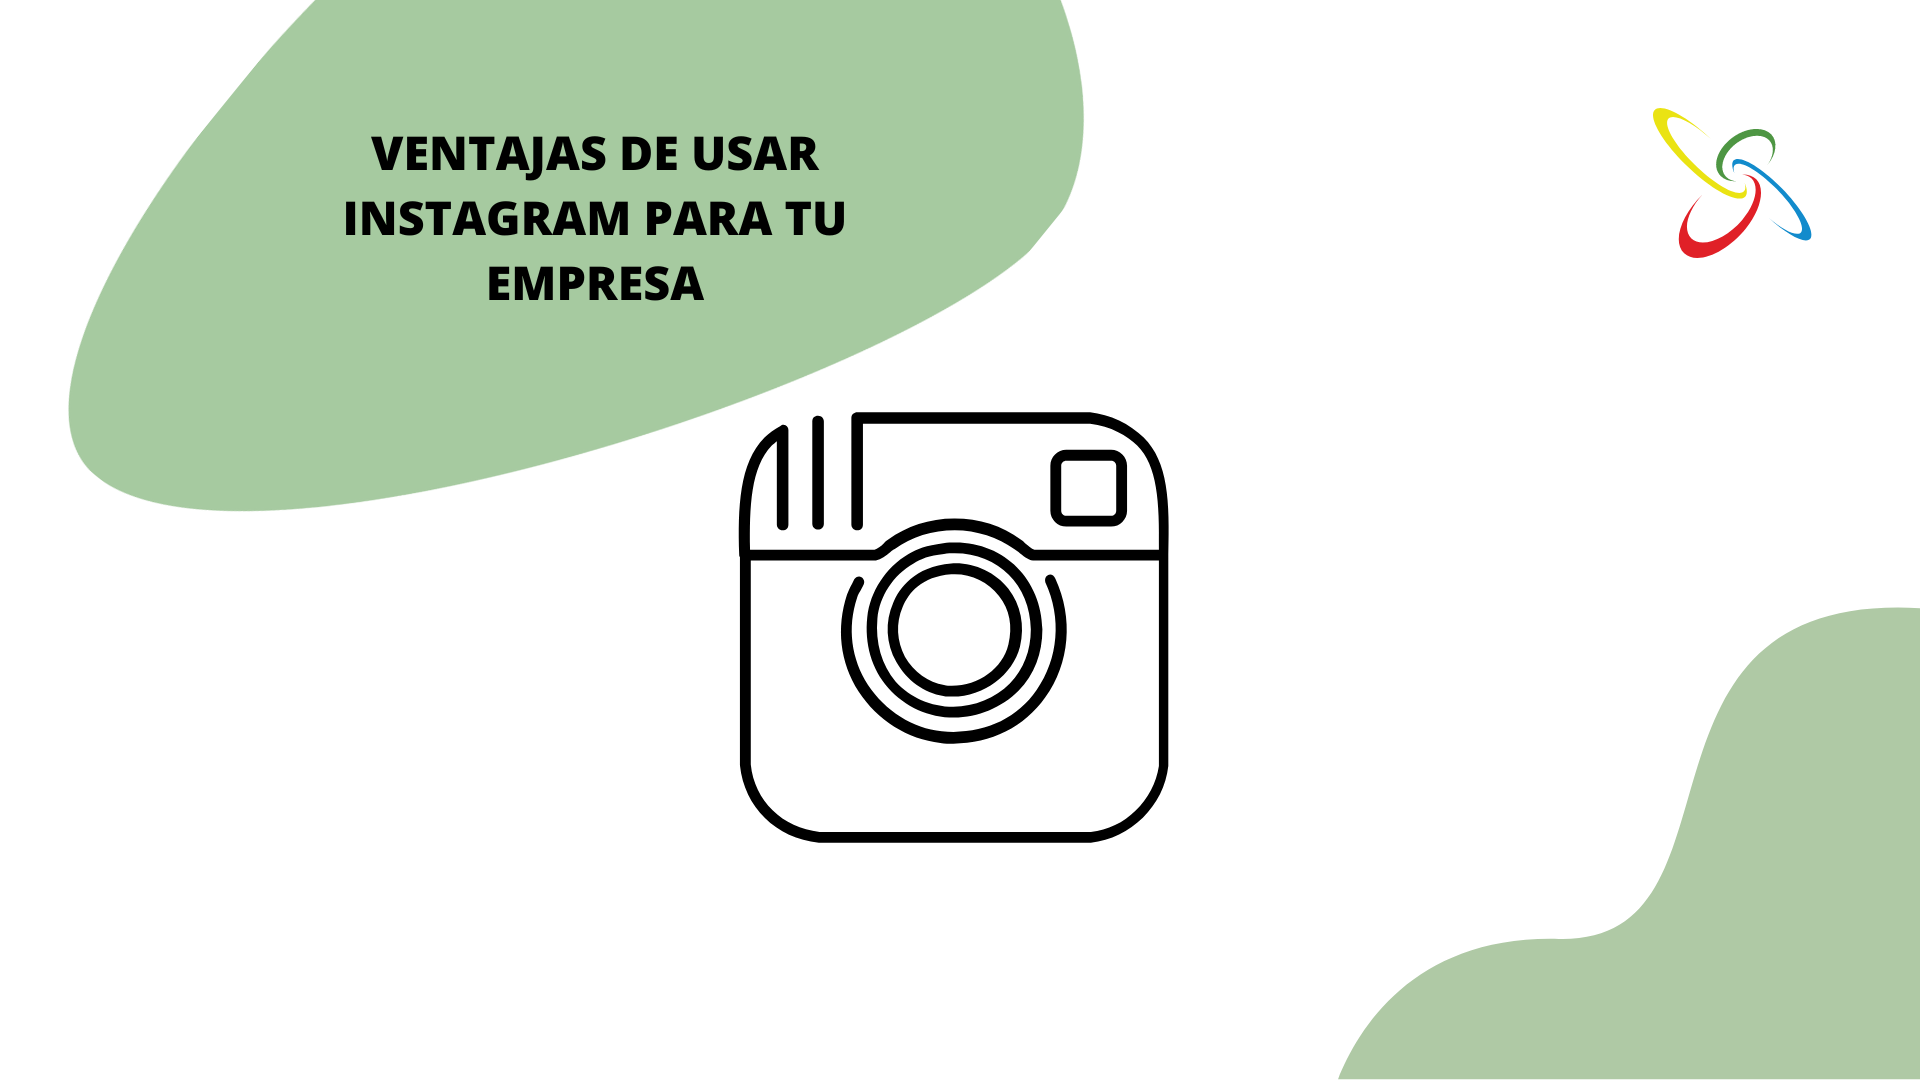 Advantages of using Instagram for your business